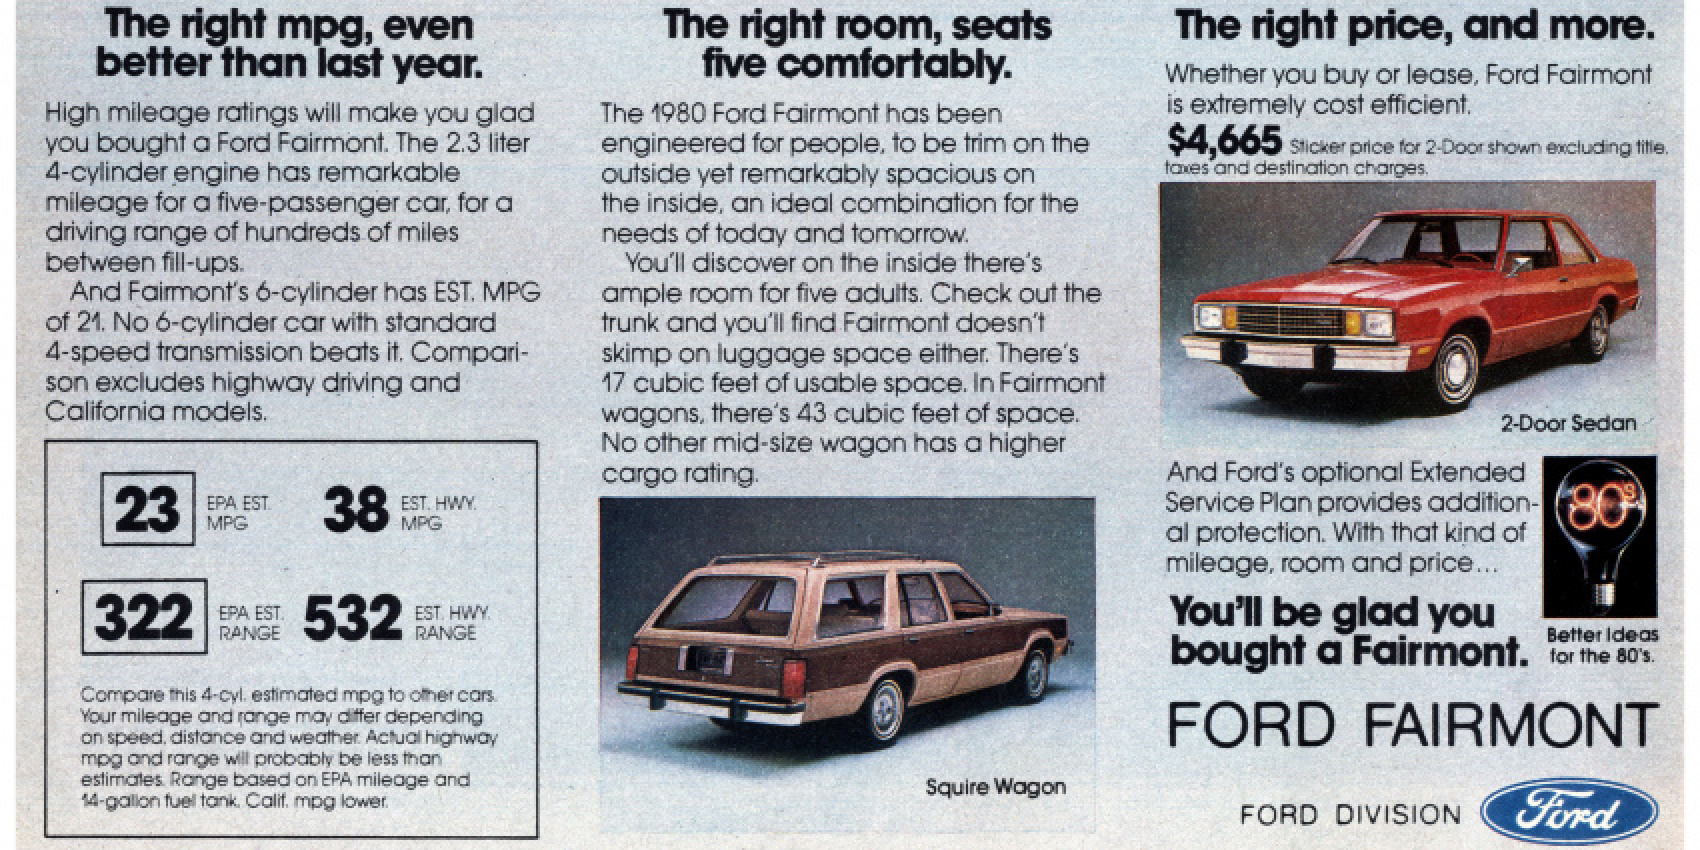 autos, car life, cars, classic cars, ford, pinto-engined 1980 ford fairmont fears no gas crisis